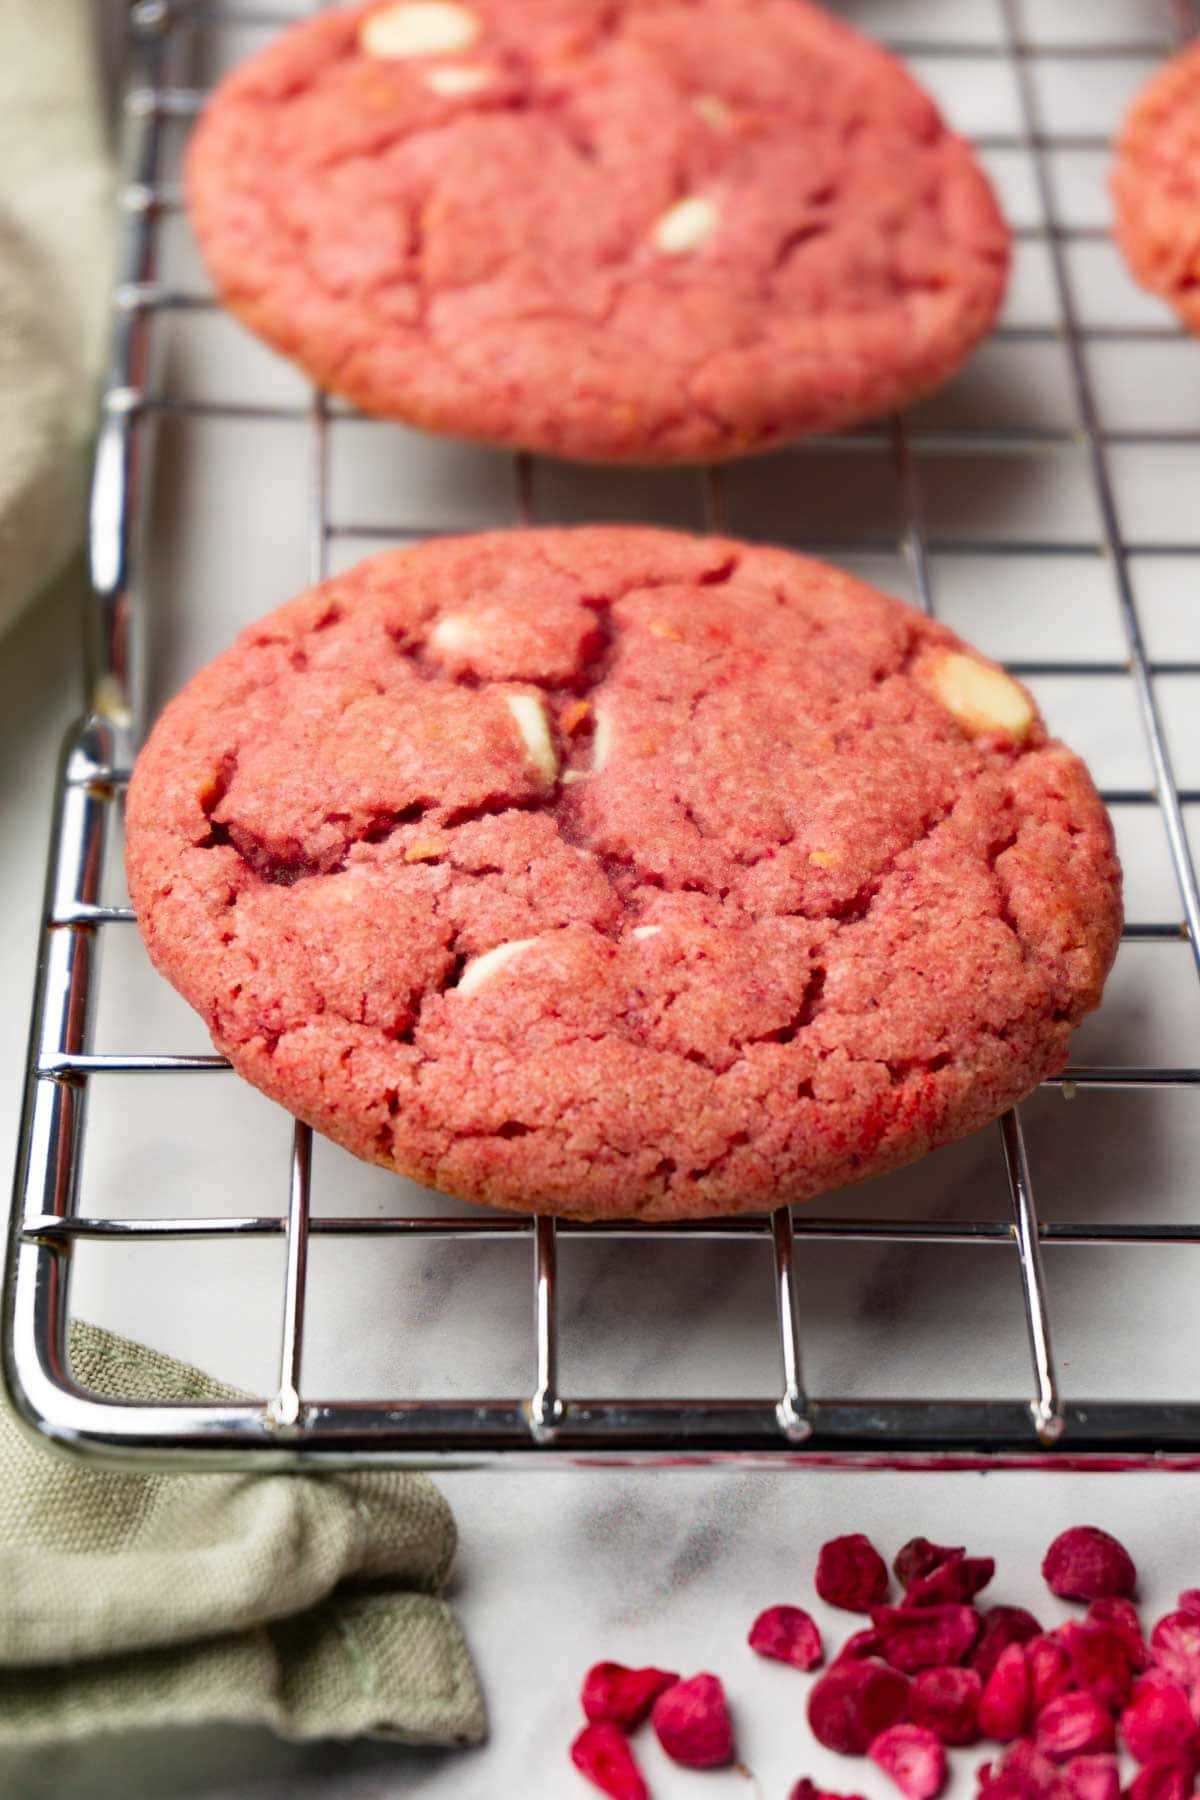 Raspberry cookies with white chocolate chips are lying on a wire rack.